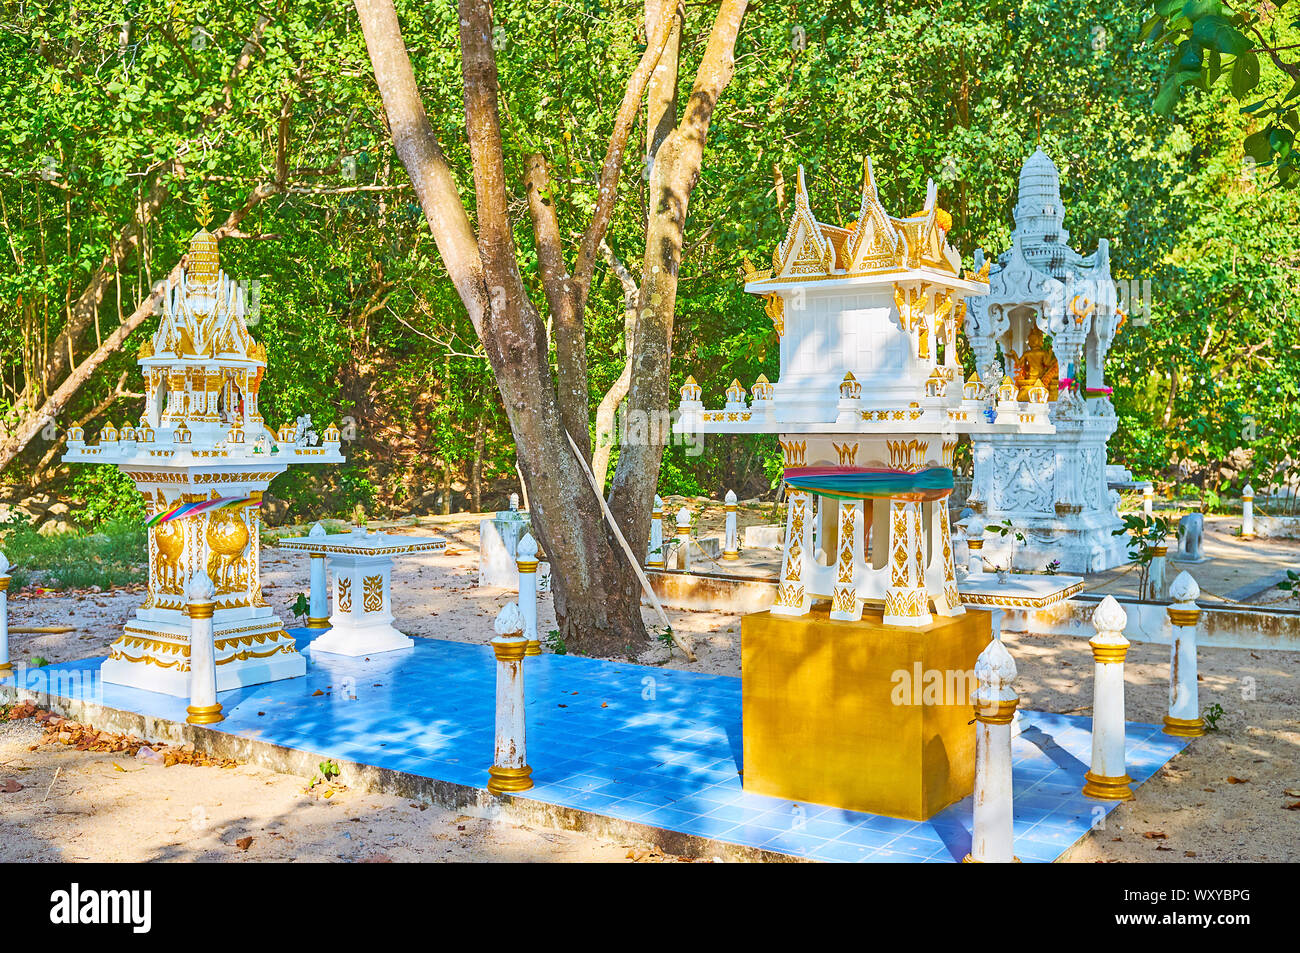 The small Buddhist shrine with gilt mondops (pavilions), decorated with fine patterns and molding, located among the trees on sand beach of Ao Nang, K Stock Photo